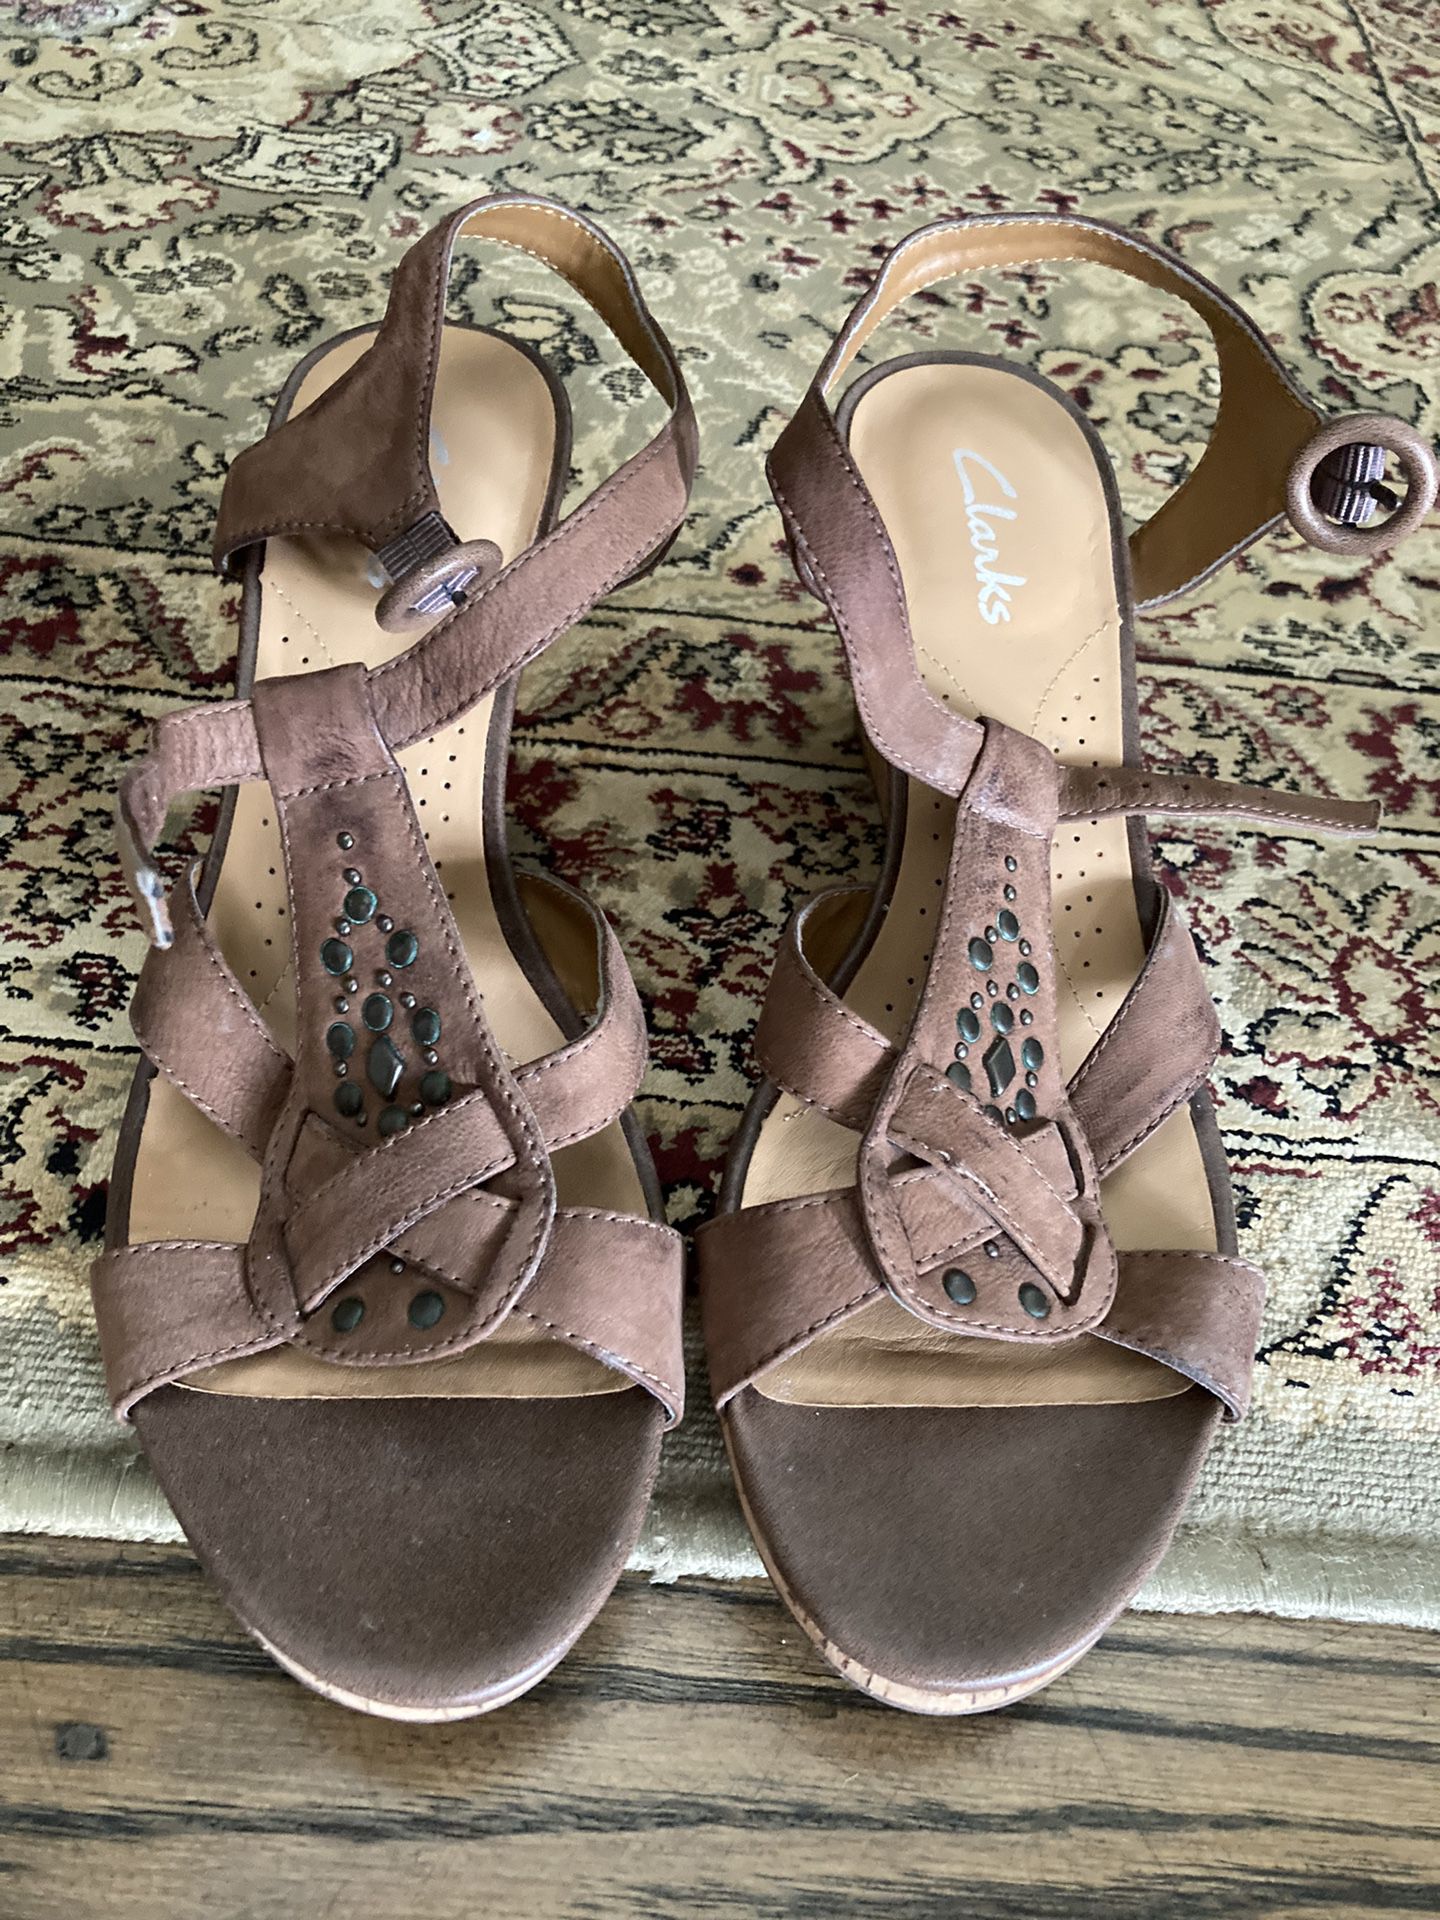 awesome Clarks leather sandals women’s size 7 with cork heel